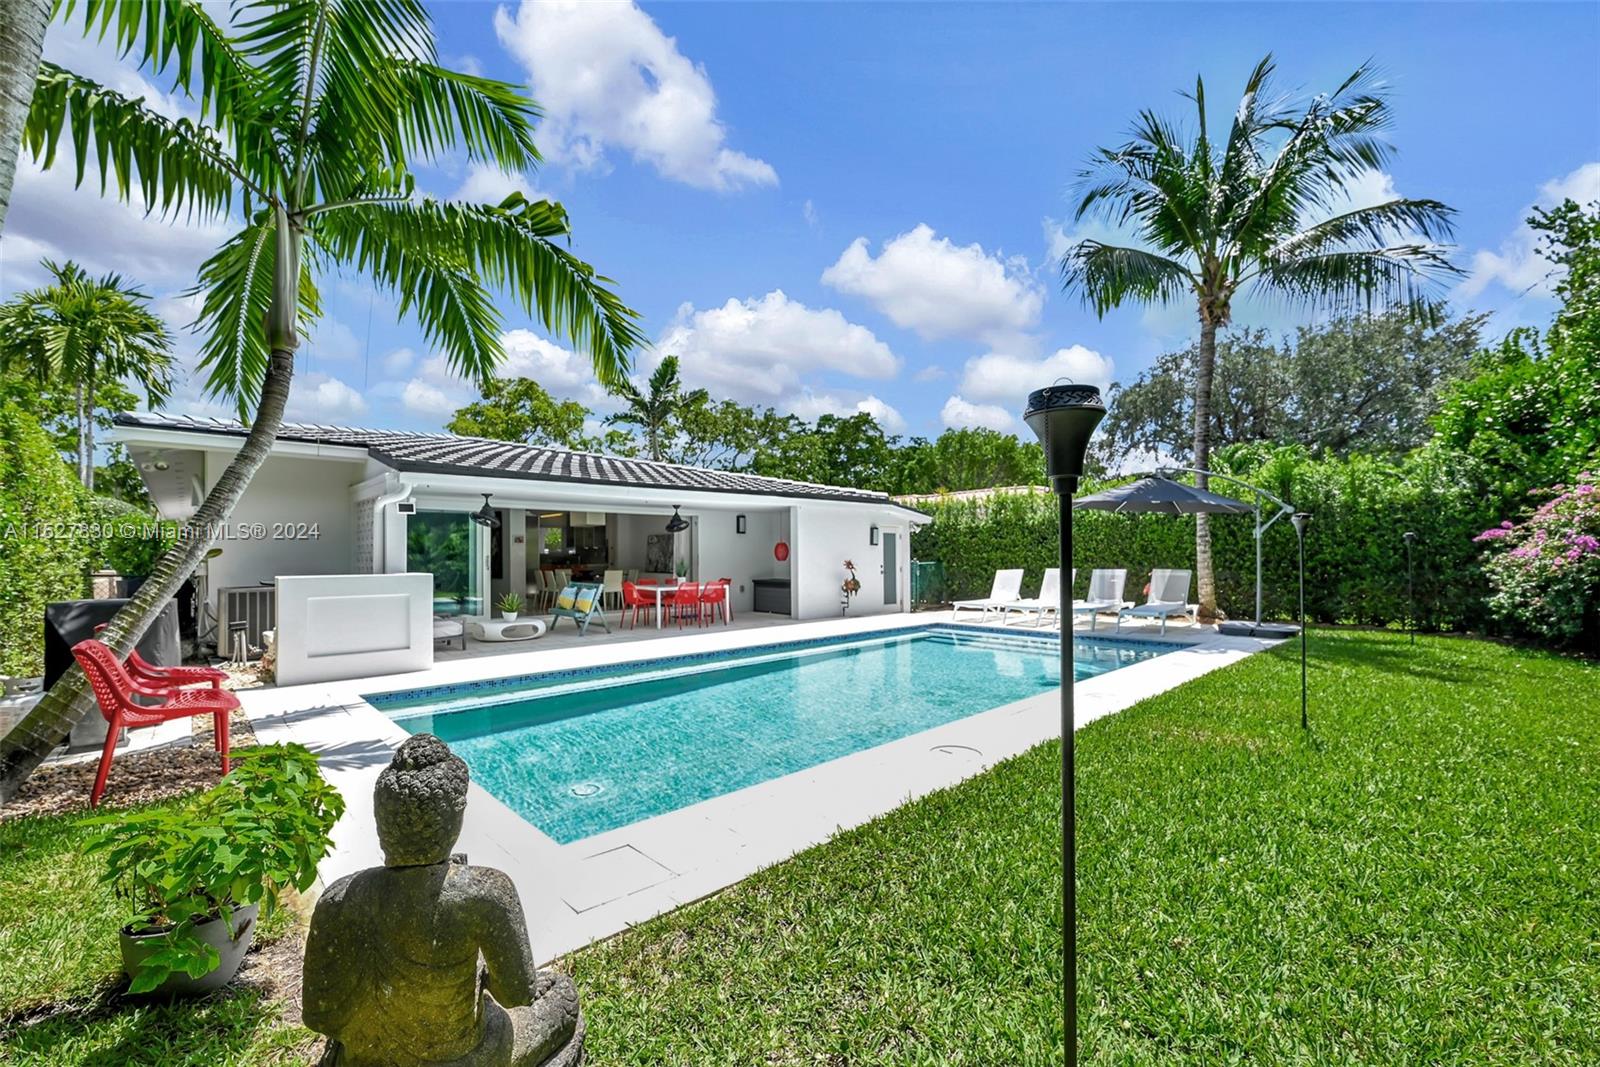 Excellent opportunity to own this modern home on prime location of coral gables golden triangle steps from Biltmore Hotel. Located in much desired tree lined street within walking distance to parks, recreation, markets and downtown coral gables. House has been updated with new bathrooms, high impact windows,italian kitchen with Miele and Sub zero appliances, bright spaces with separate dining, living and extra area to entertain. One car garage. Walk into a foyer which separates both entertaining spaces and your private 3 bedroom suites with many closet space. Walk out to private terrace/patio area from both dining living through wall to wall glass modern sliding doors combining the inside with the outside of home. Salt water pool and patio is privately fenced with surrounding landscaping.